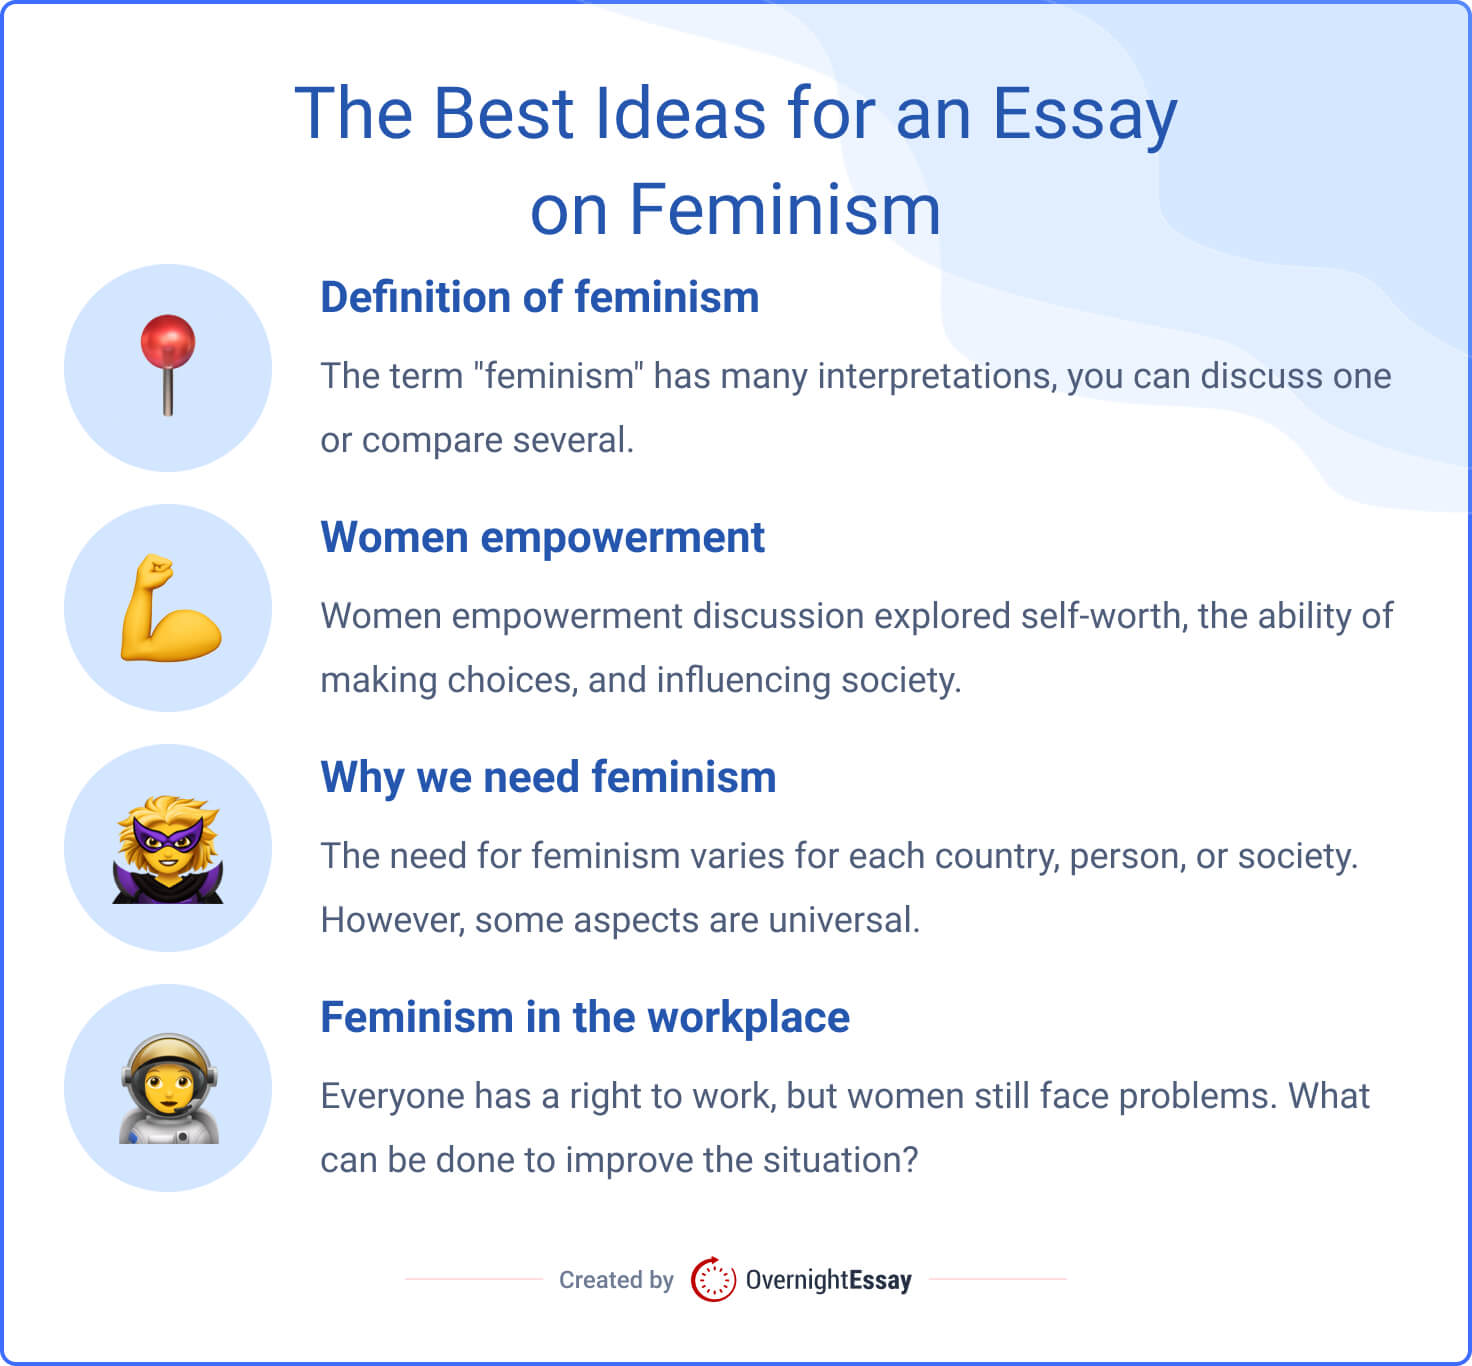 The picture introduces the best ideas for a women empowerment essay. 